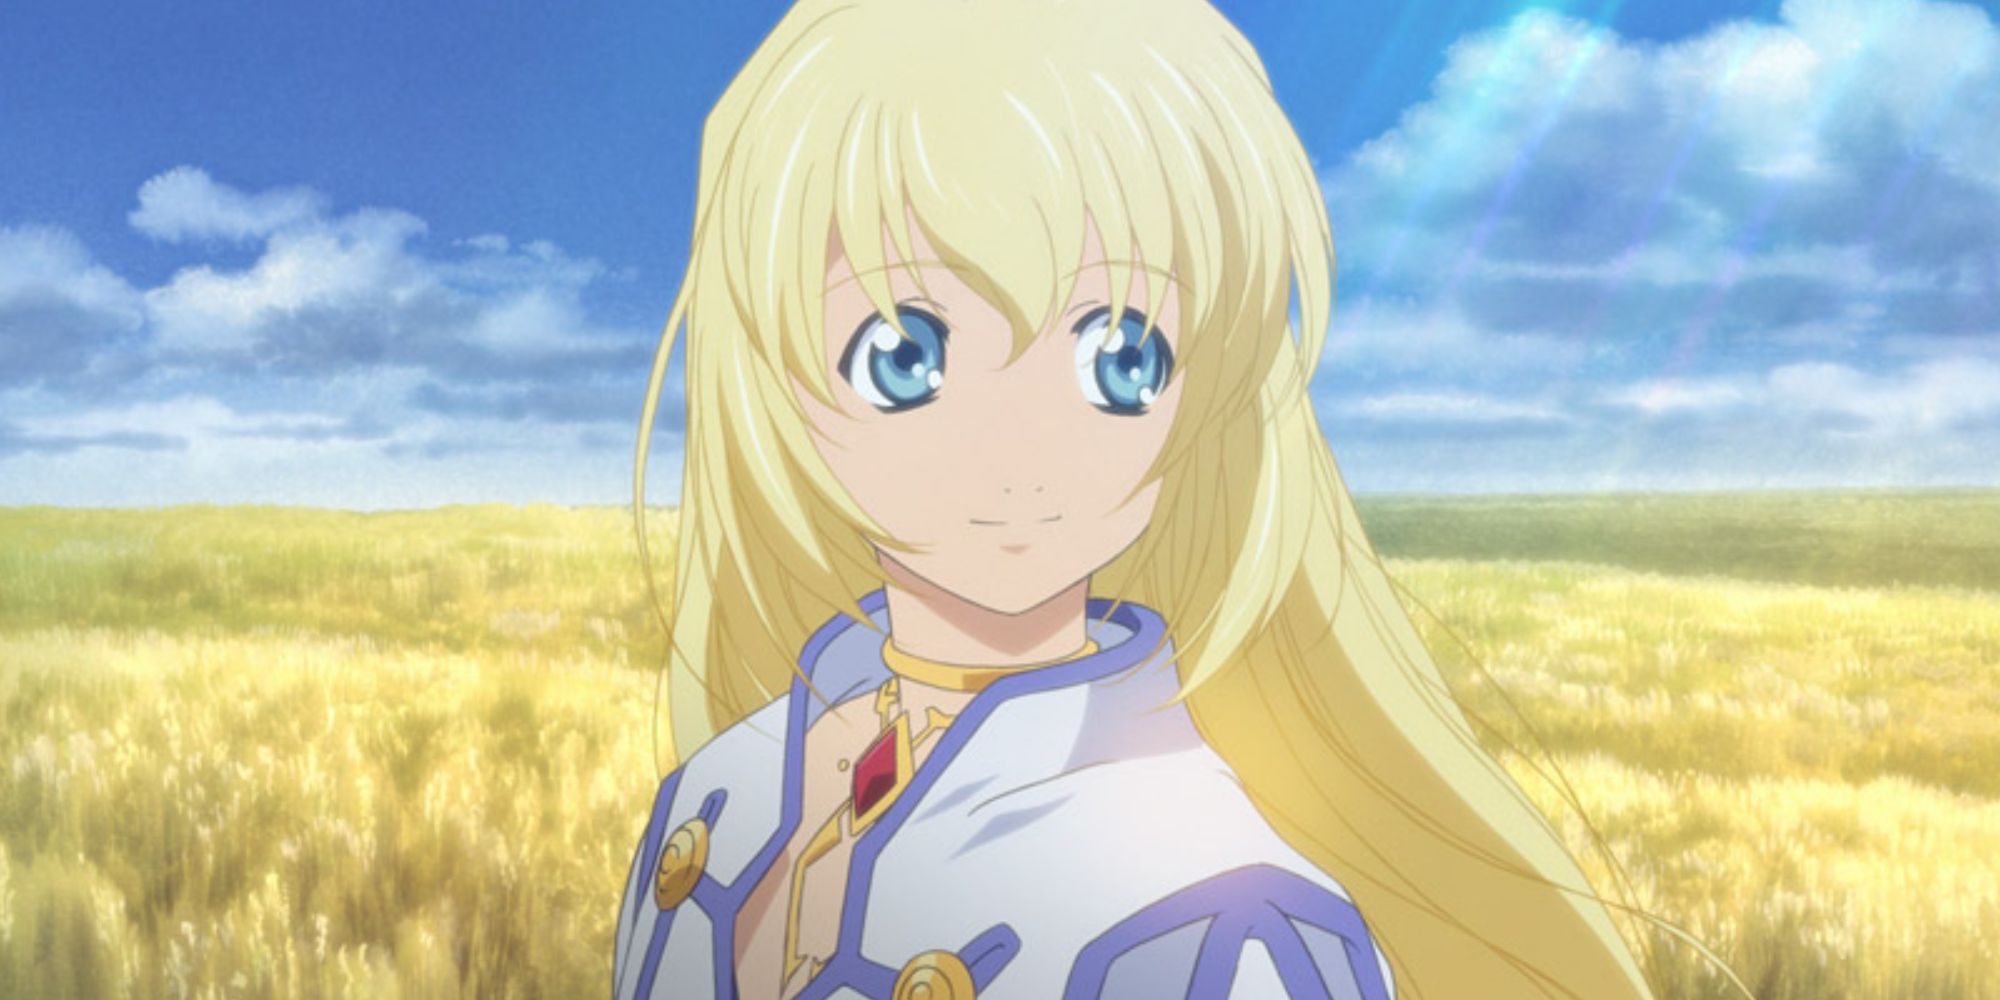 An image of Colette from Tales of Symphonia Remastered, standing in front of a field underneath a bright blue sky.